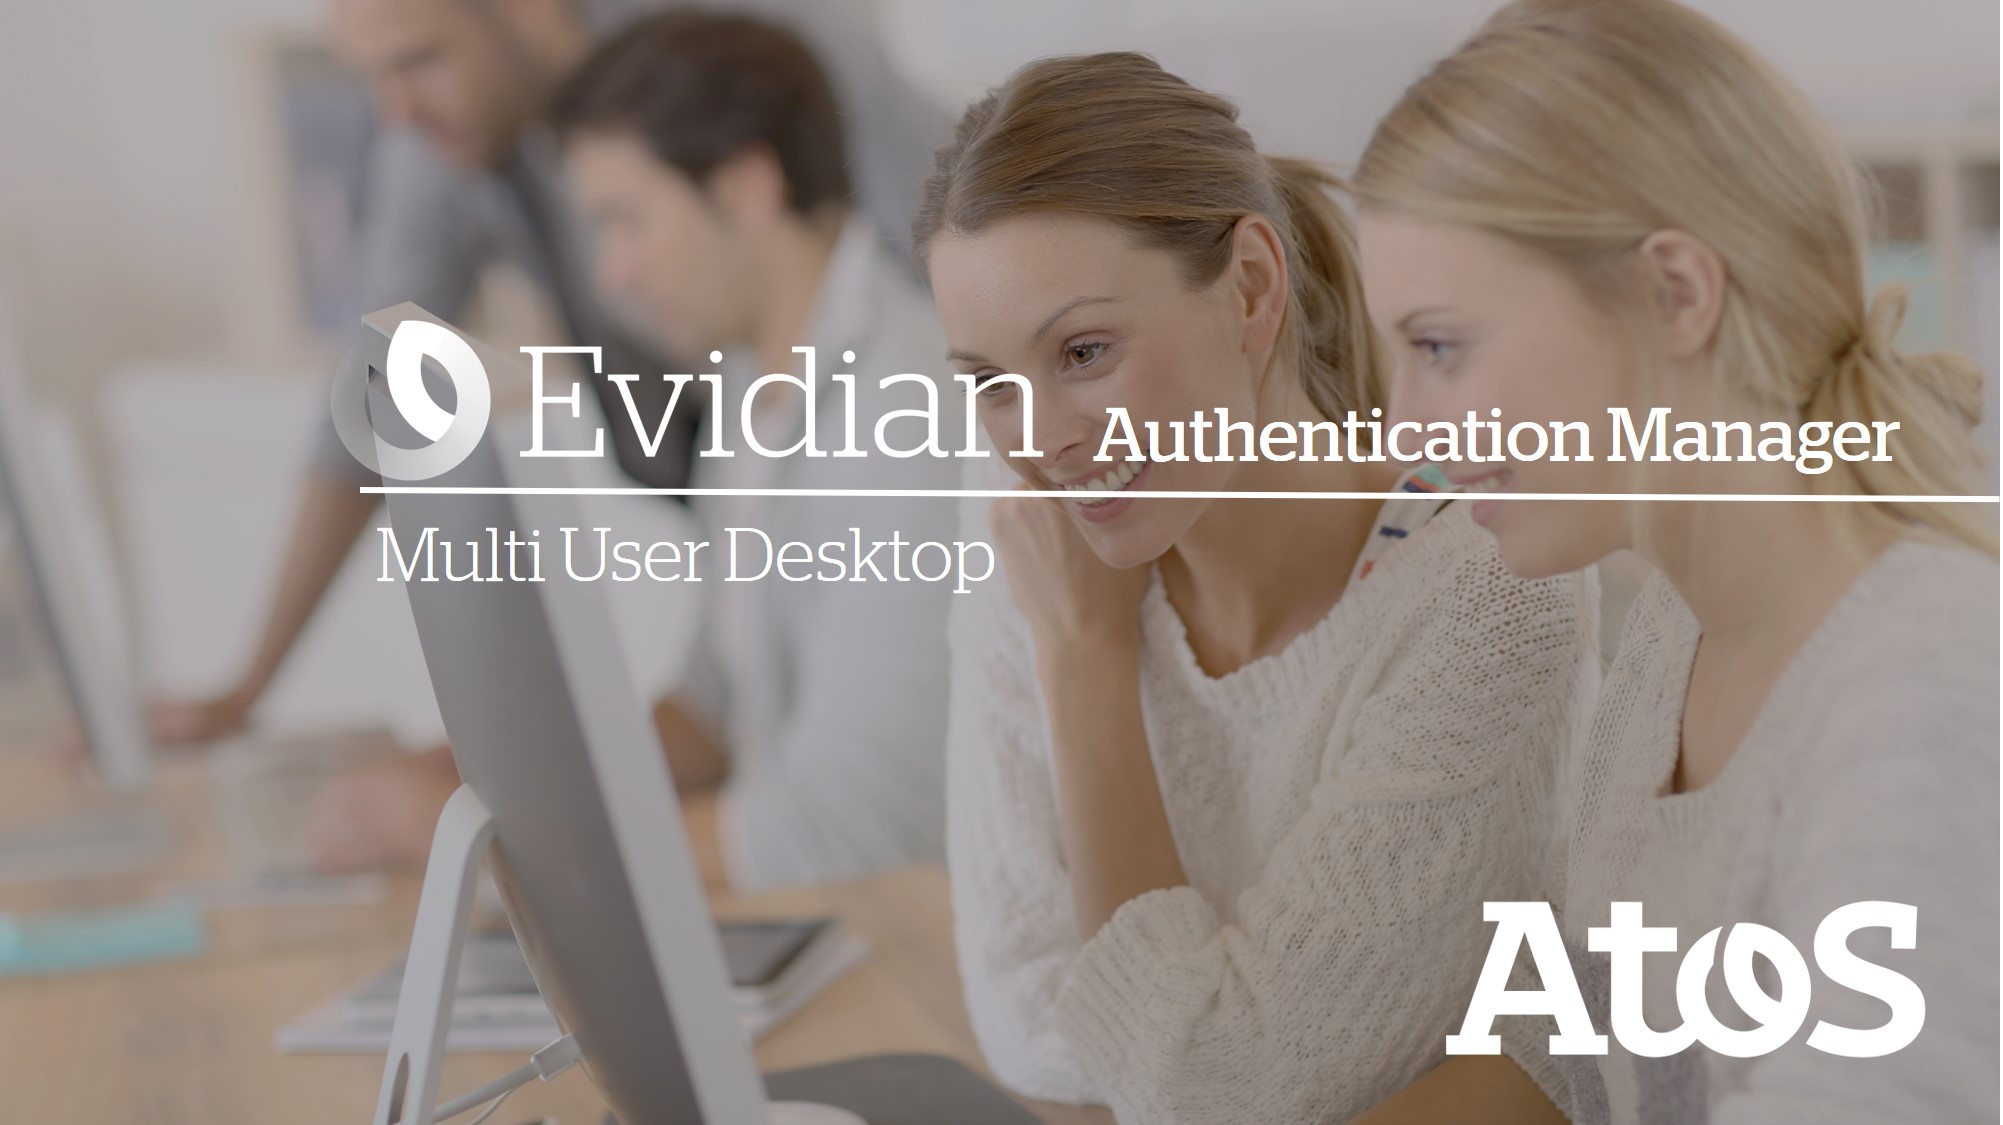 Multi-User Desktop - Autologon to a shared account with no password but a fast strong authentication